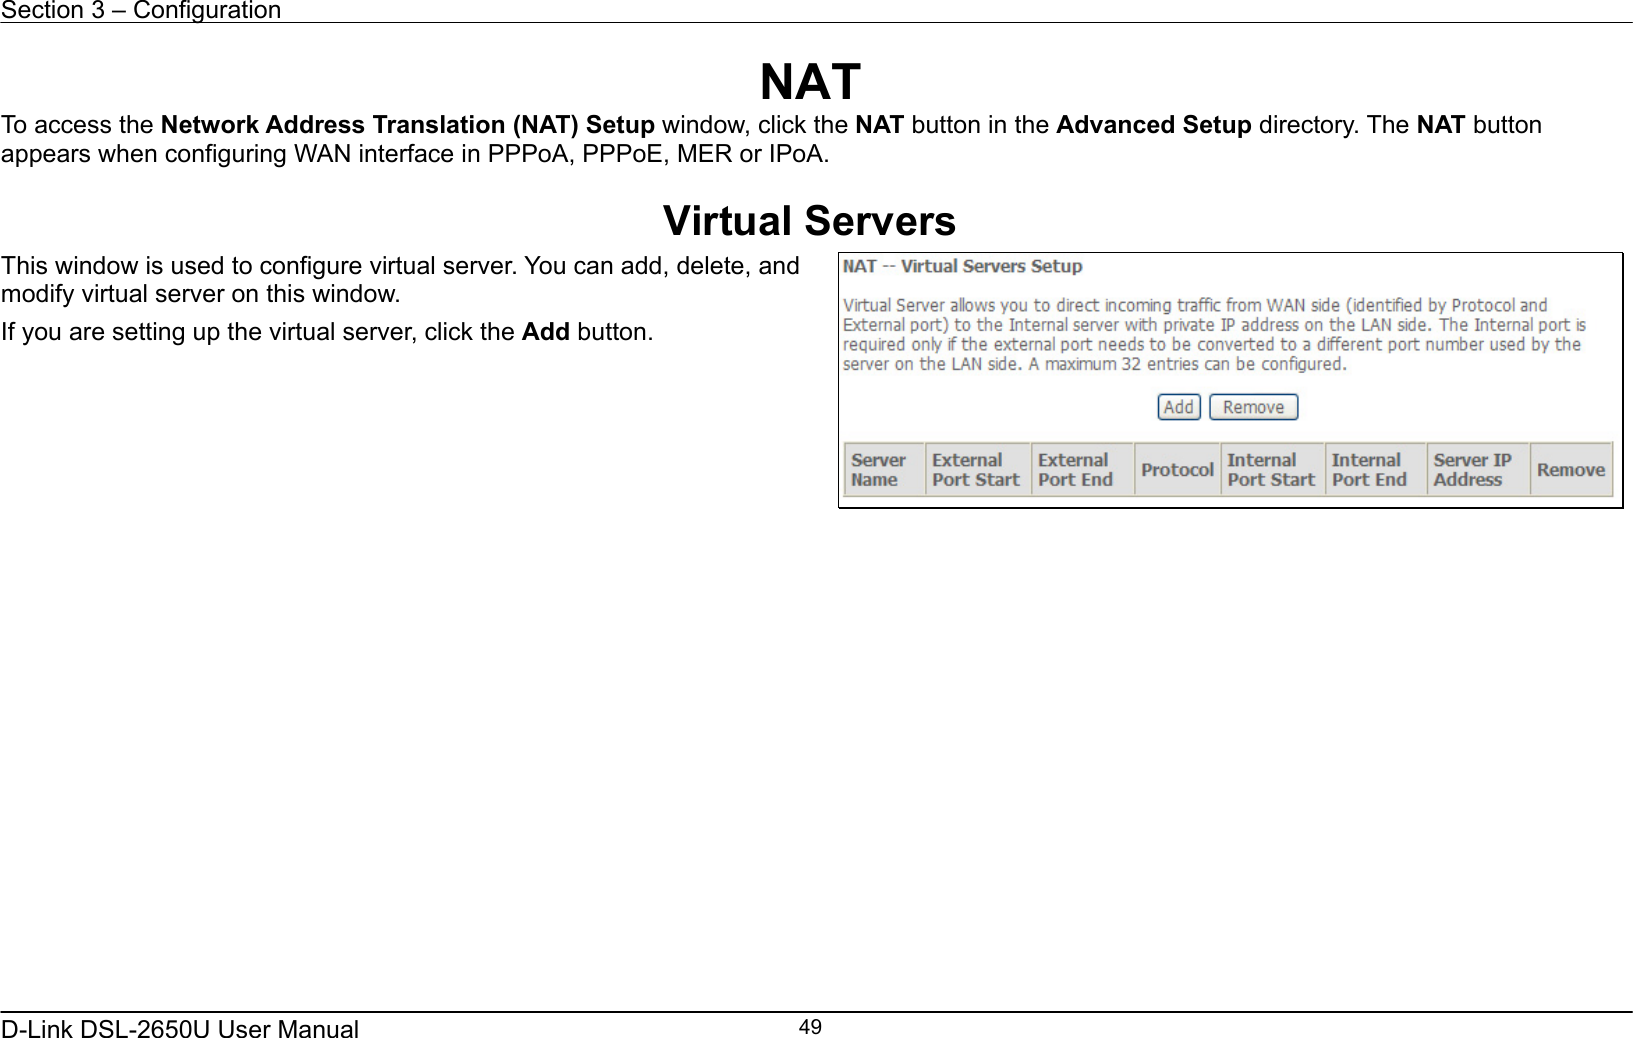 Section 3 – Configuration   D-Link DSL-2650U User Manual    49NAT To access the Network Address Translation (NAT) Setup window, click the NAT button in the Advanced Setup directory. The NAT button appears when configuring WAN interface in PPPoA, PPPoE, MER or IPoA.  Virtual Servers This window is used to configure virtual server. You can add, delete, and modify virtual server on this window.   If you are setting up the virtual server, click the Add button.         